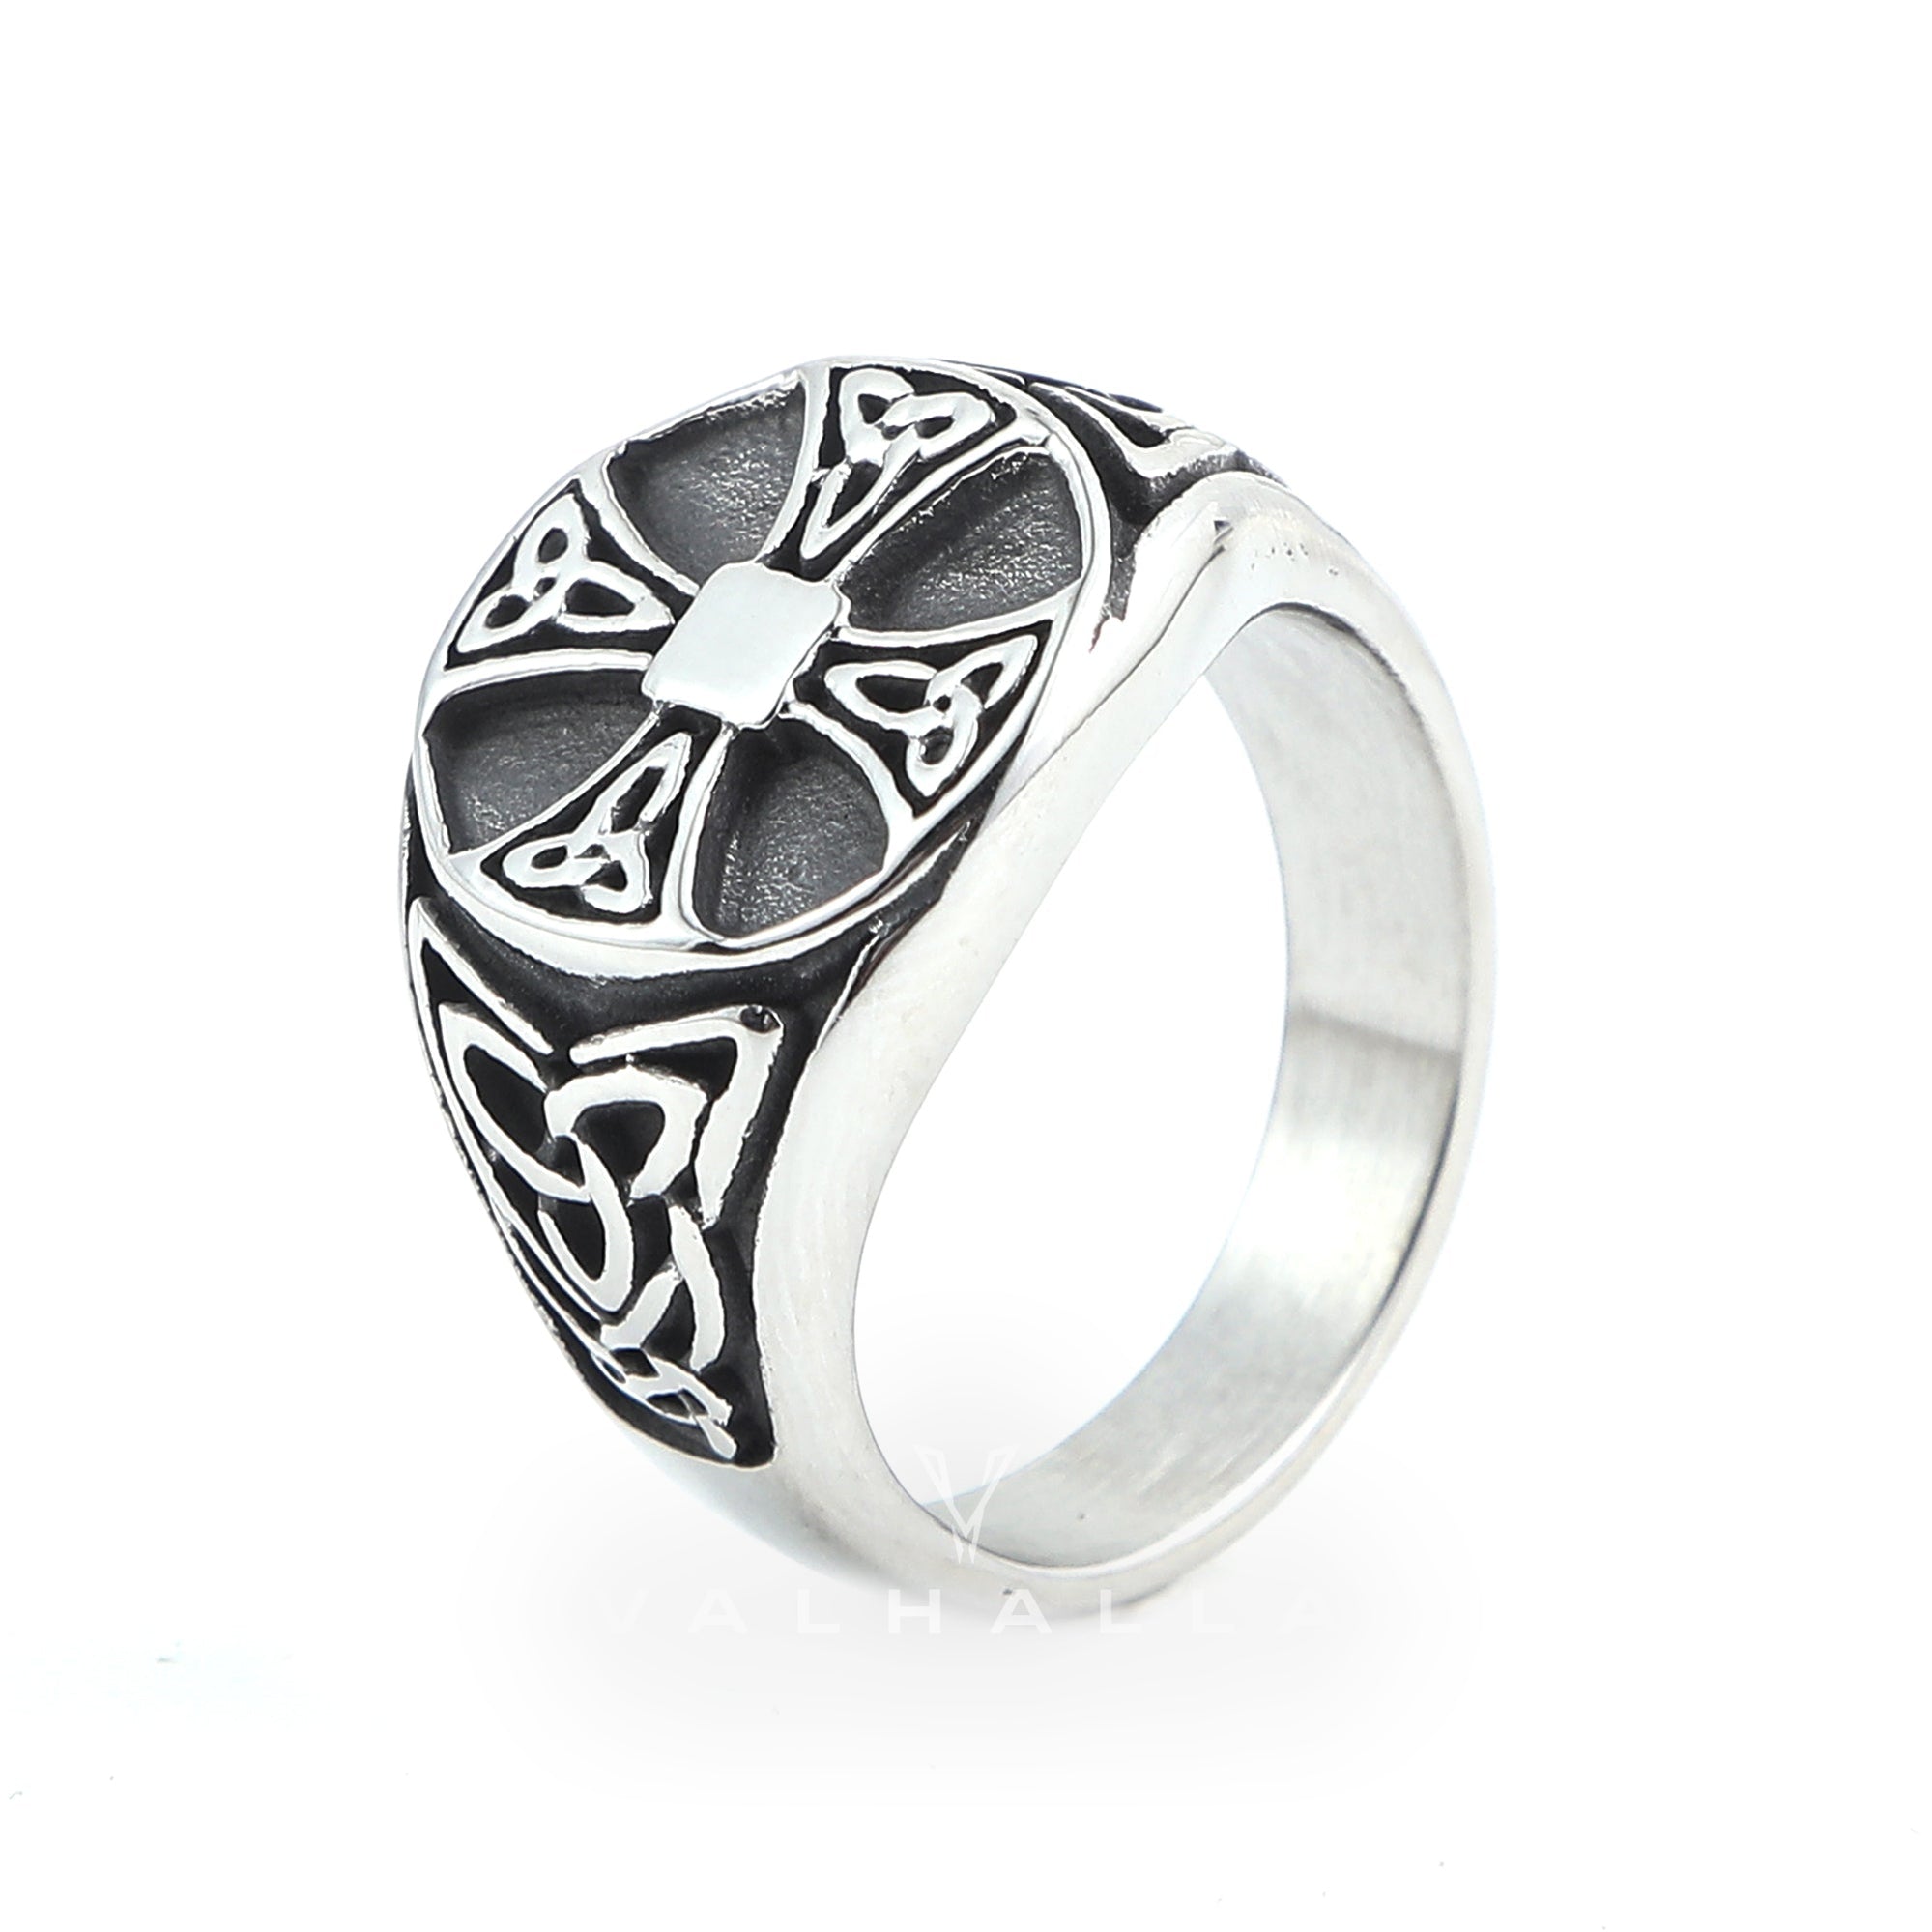 Handcrafted Stainless Steel Celtic Knot Cross Ring